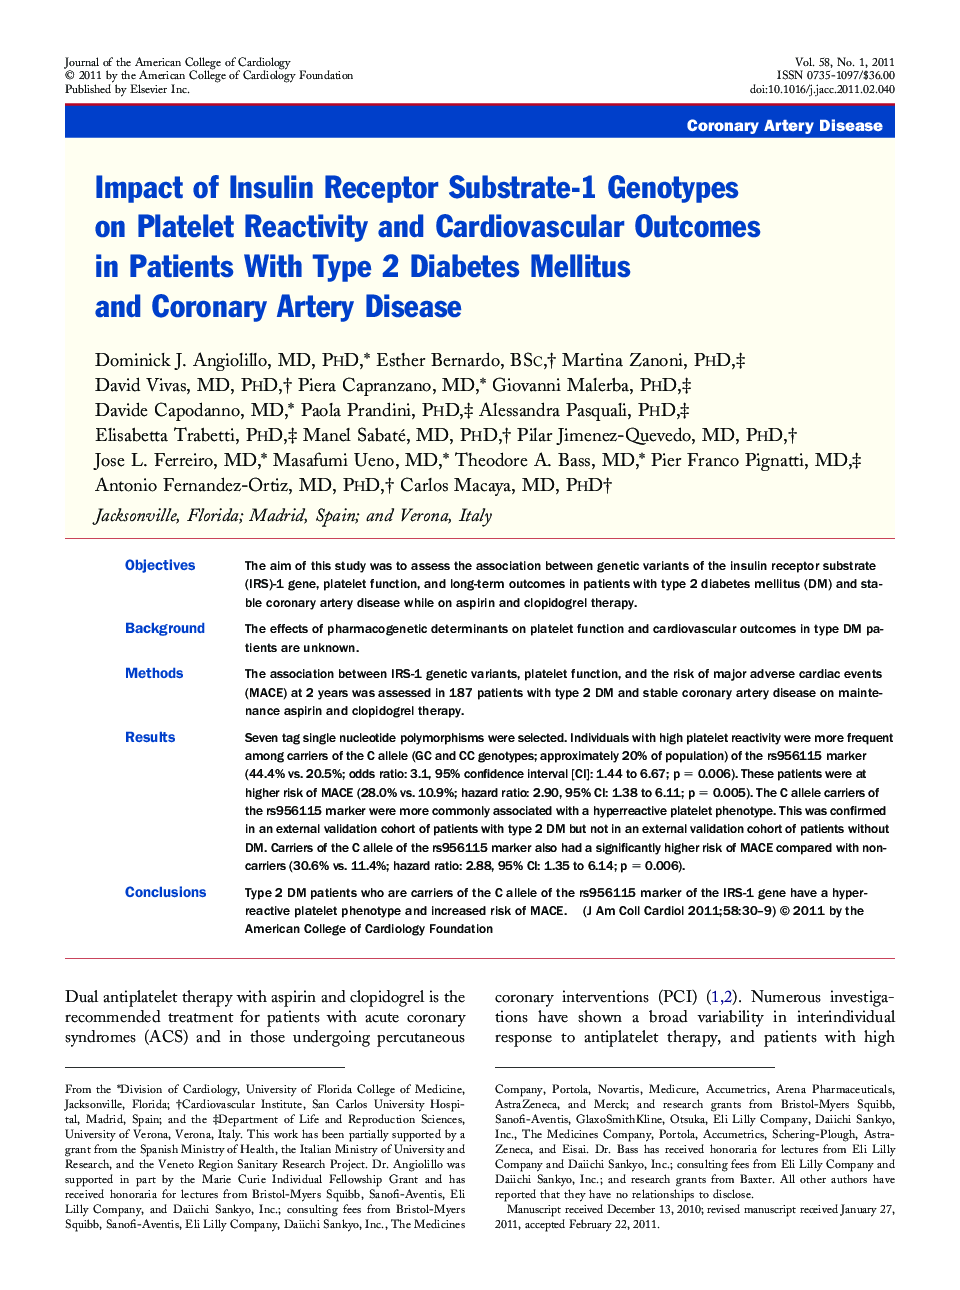 Impact of Insulin Receptor Substrate-1 Genotypes on Platelet Reactivity and Cardiovascular Outcomes in Patients With Type 2 Diabetes Mellitus and Coronary Artery Disease 